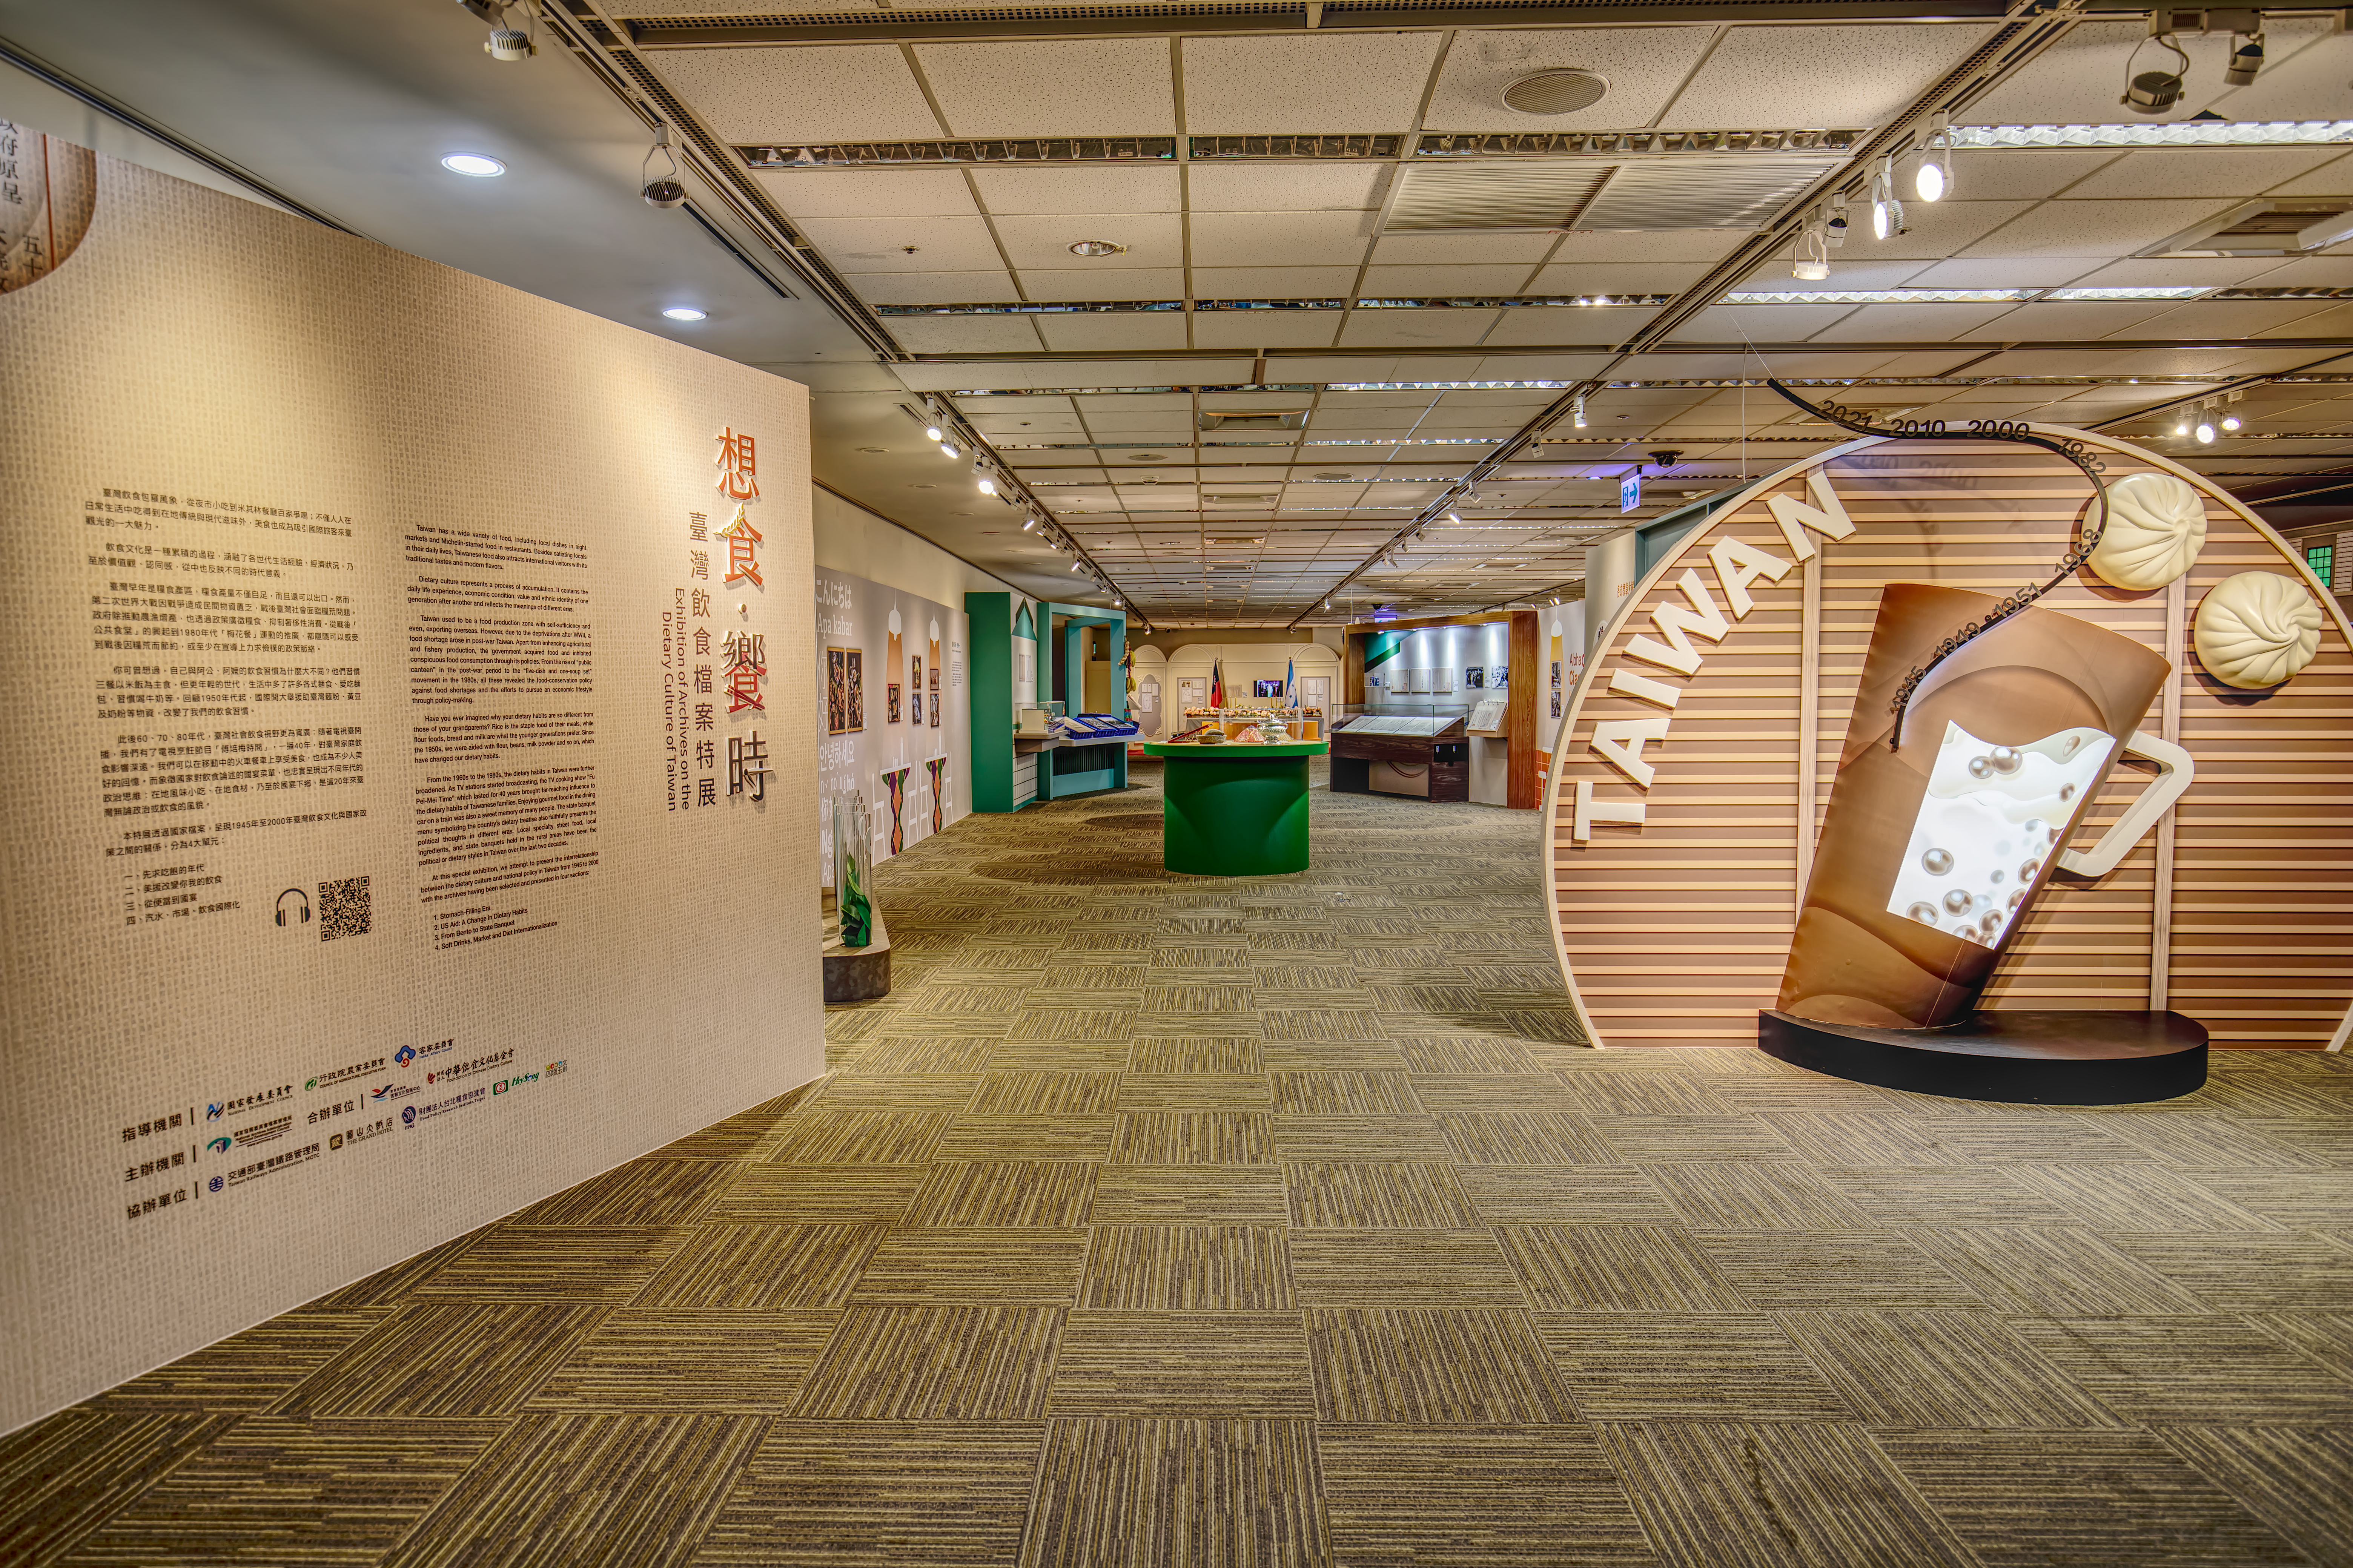 Eat More, Eat Better: Exhibition of Archives on the Dietary Culture of Taiwan